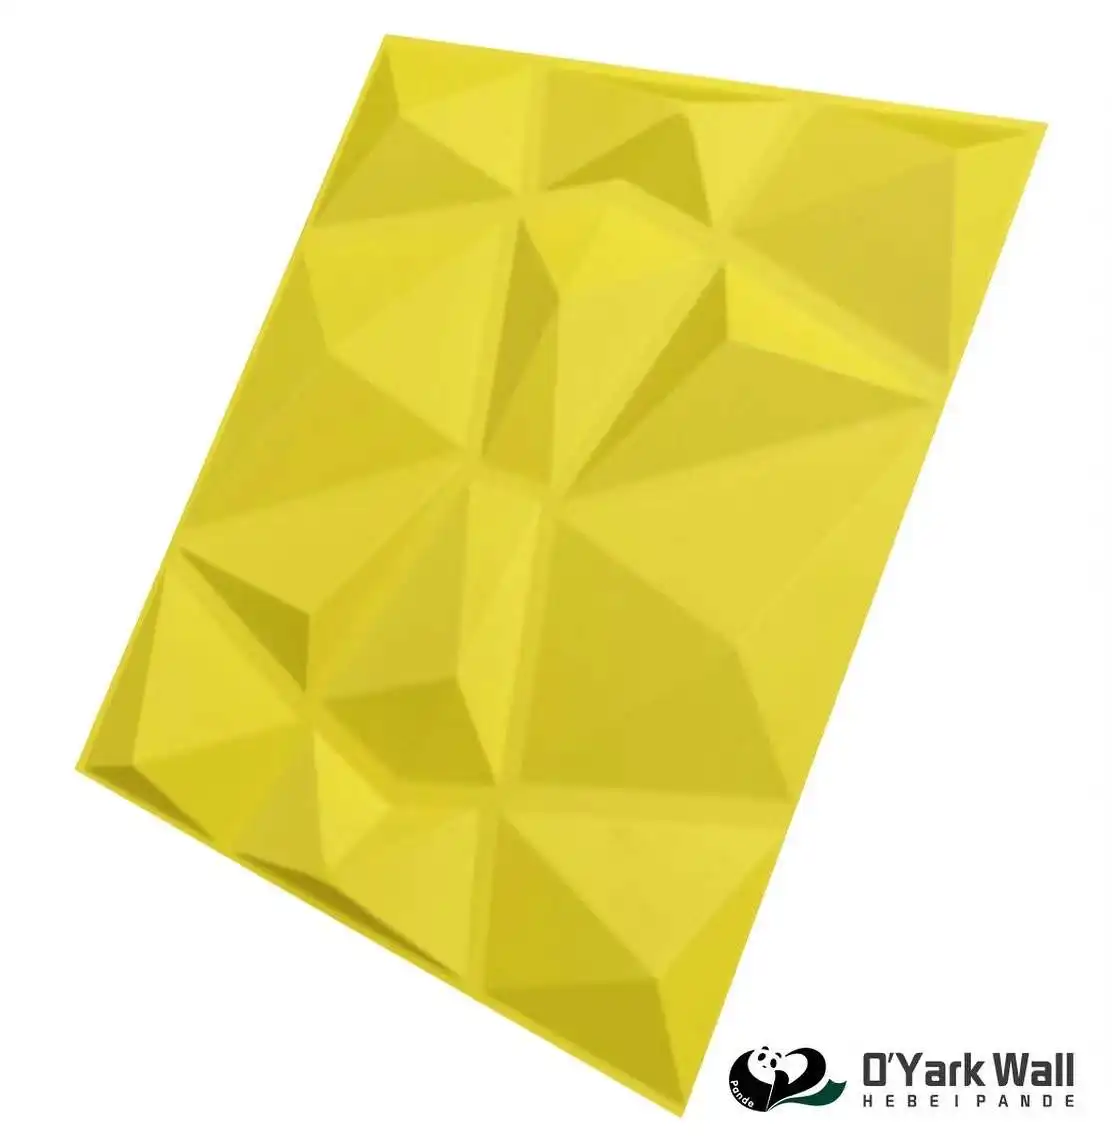 Modern 3d textured Indoor and outdoor wall decor 3d wall yellow color 3d wall panels plastic pvc